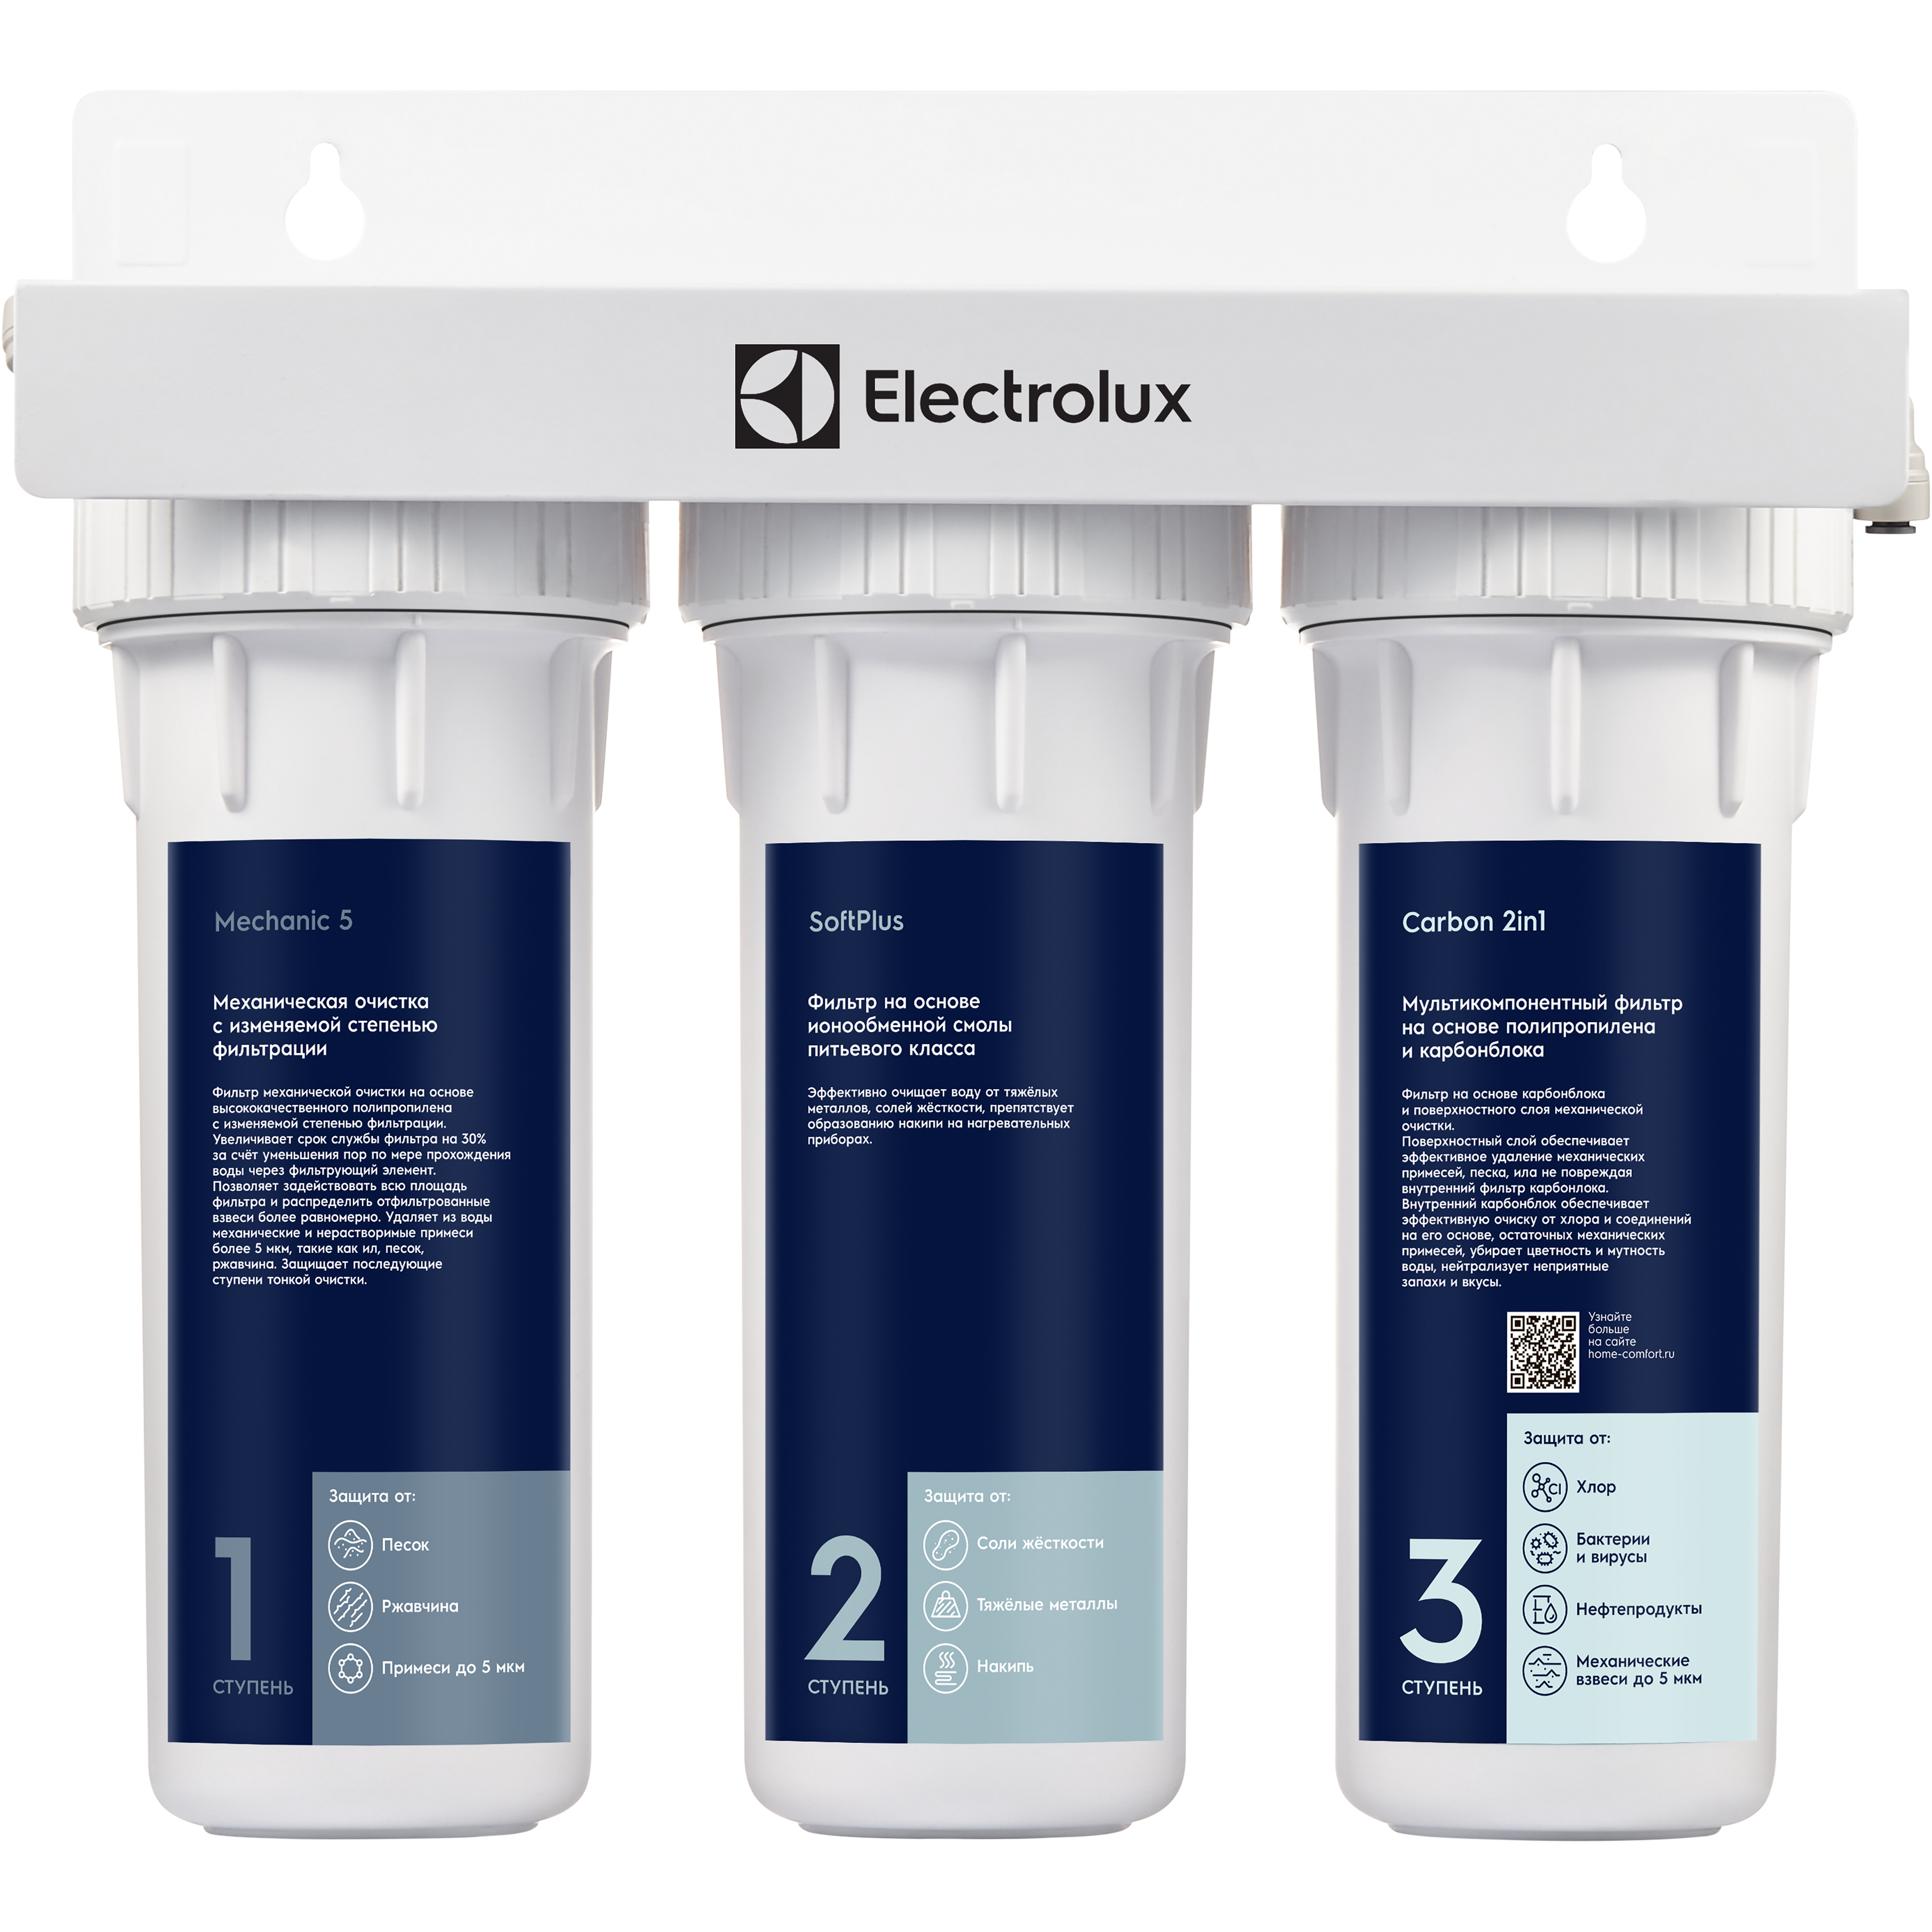 Electrolux Kit AM Carbon 2in1 Prof